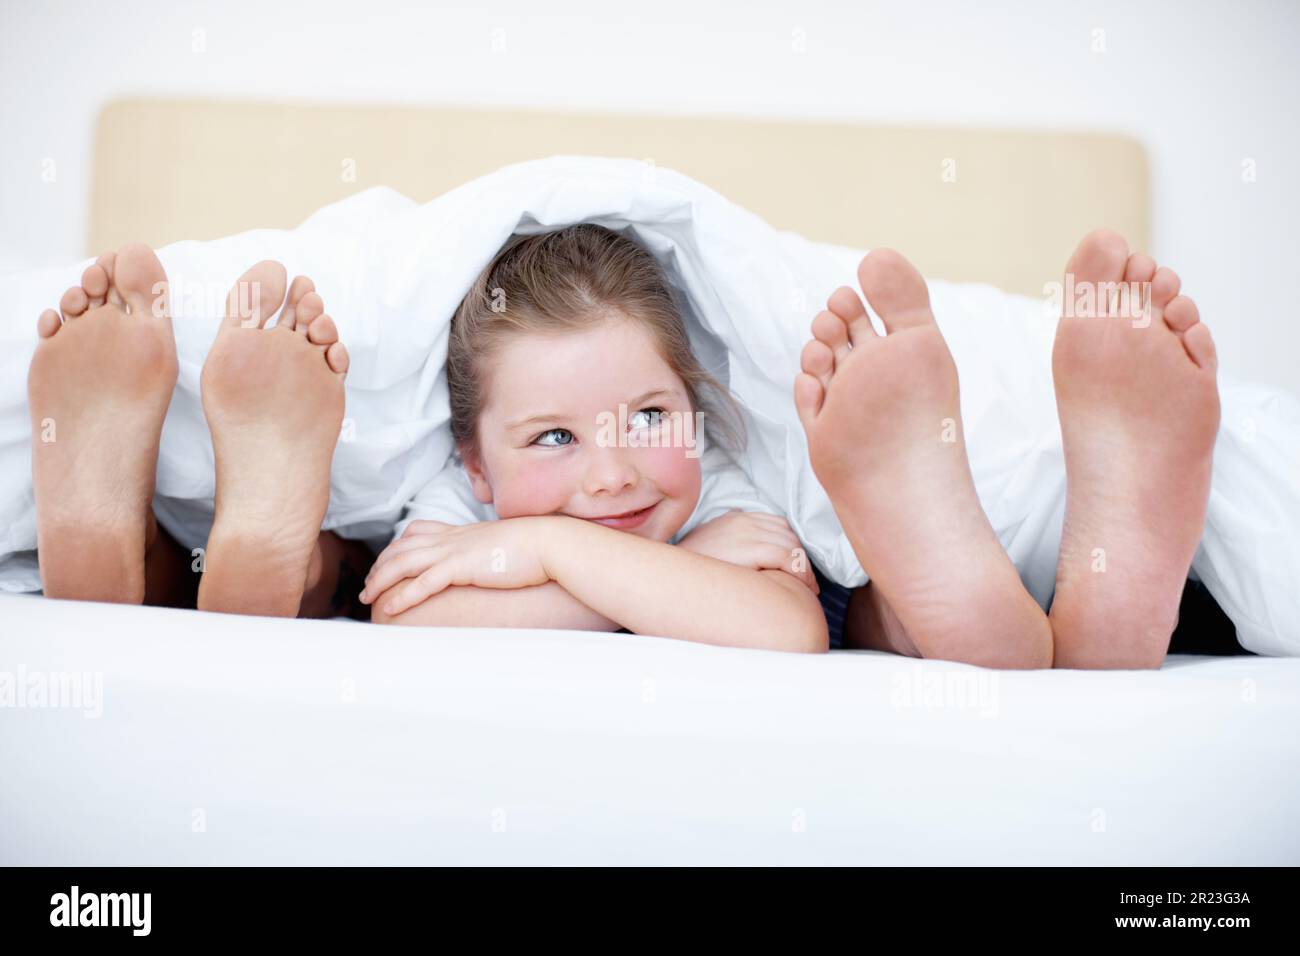 Im about to tickle them sshh..Fun shot of a young girl peeking out from between her parents feet while they lie in bed. Stock Photo